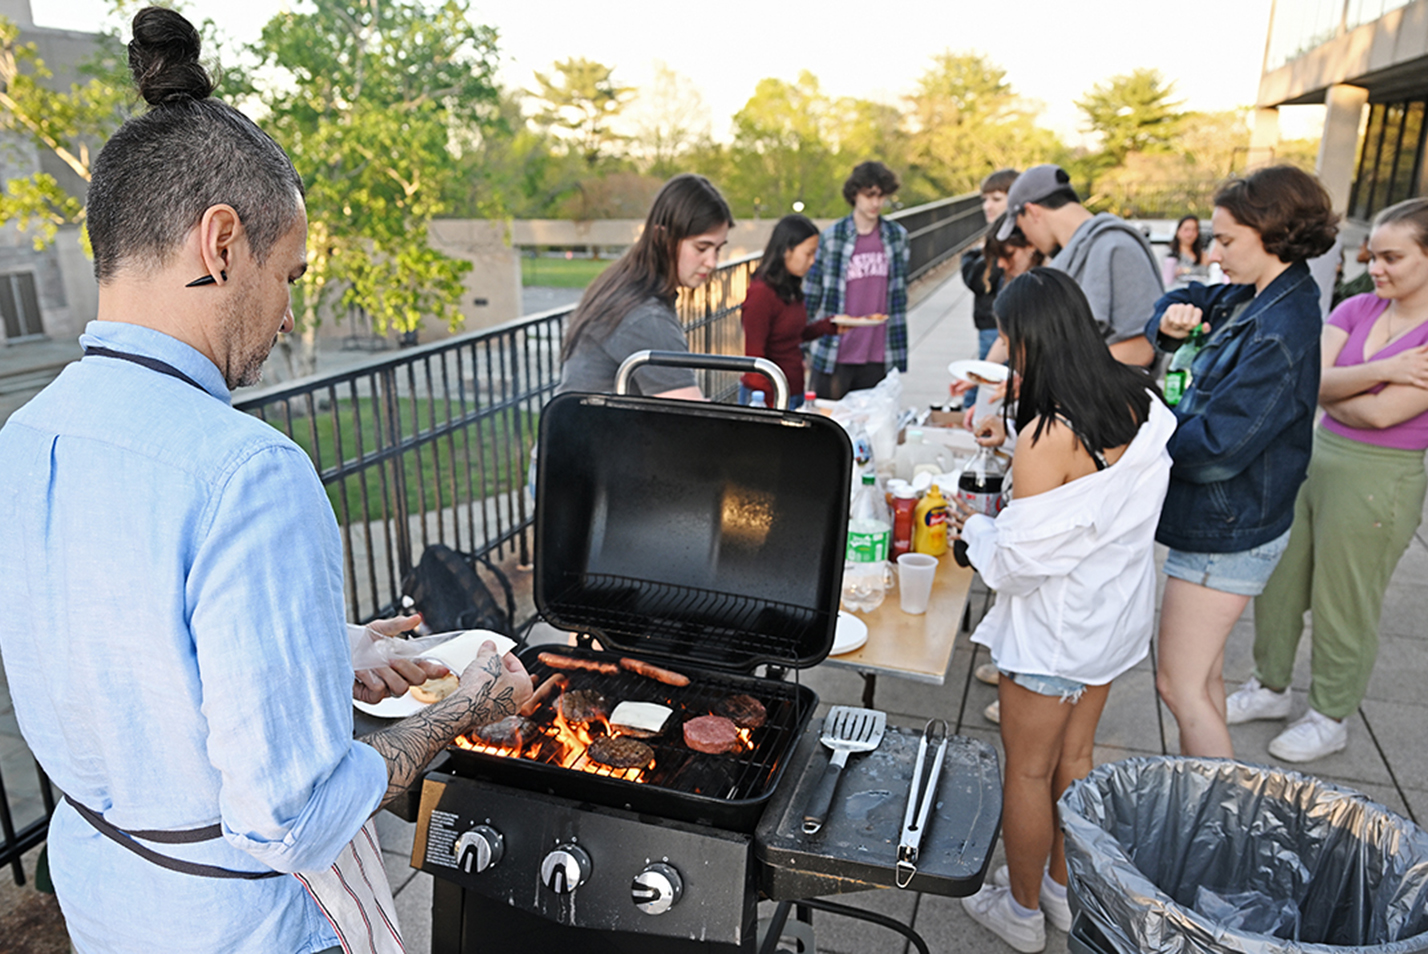 A professor grills food for graduating students at an outdoor gathering